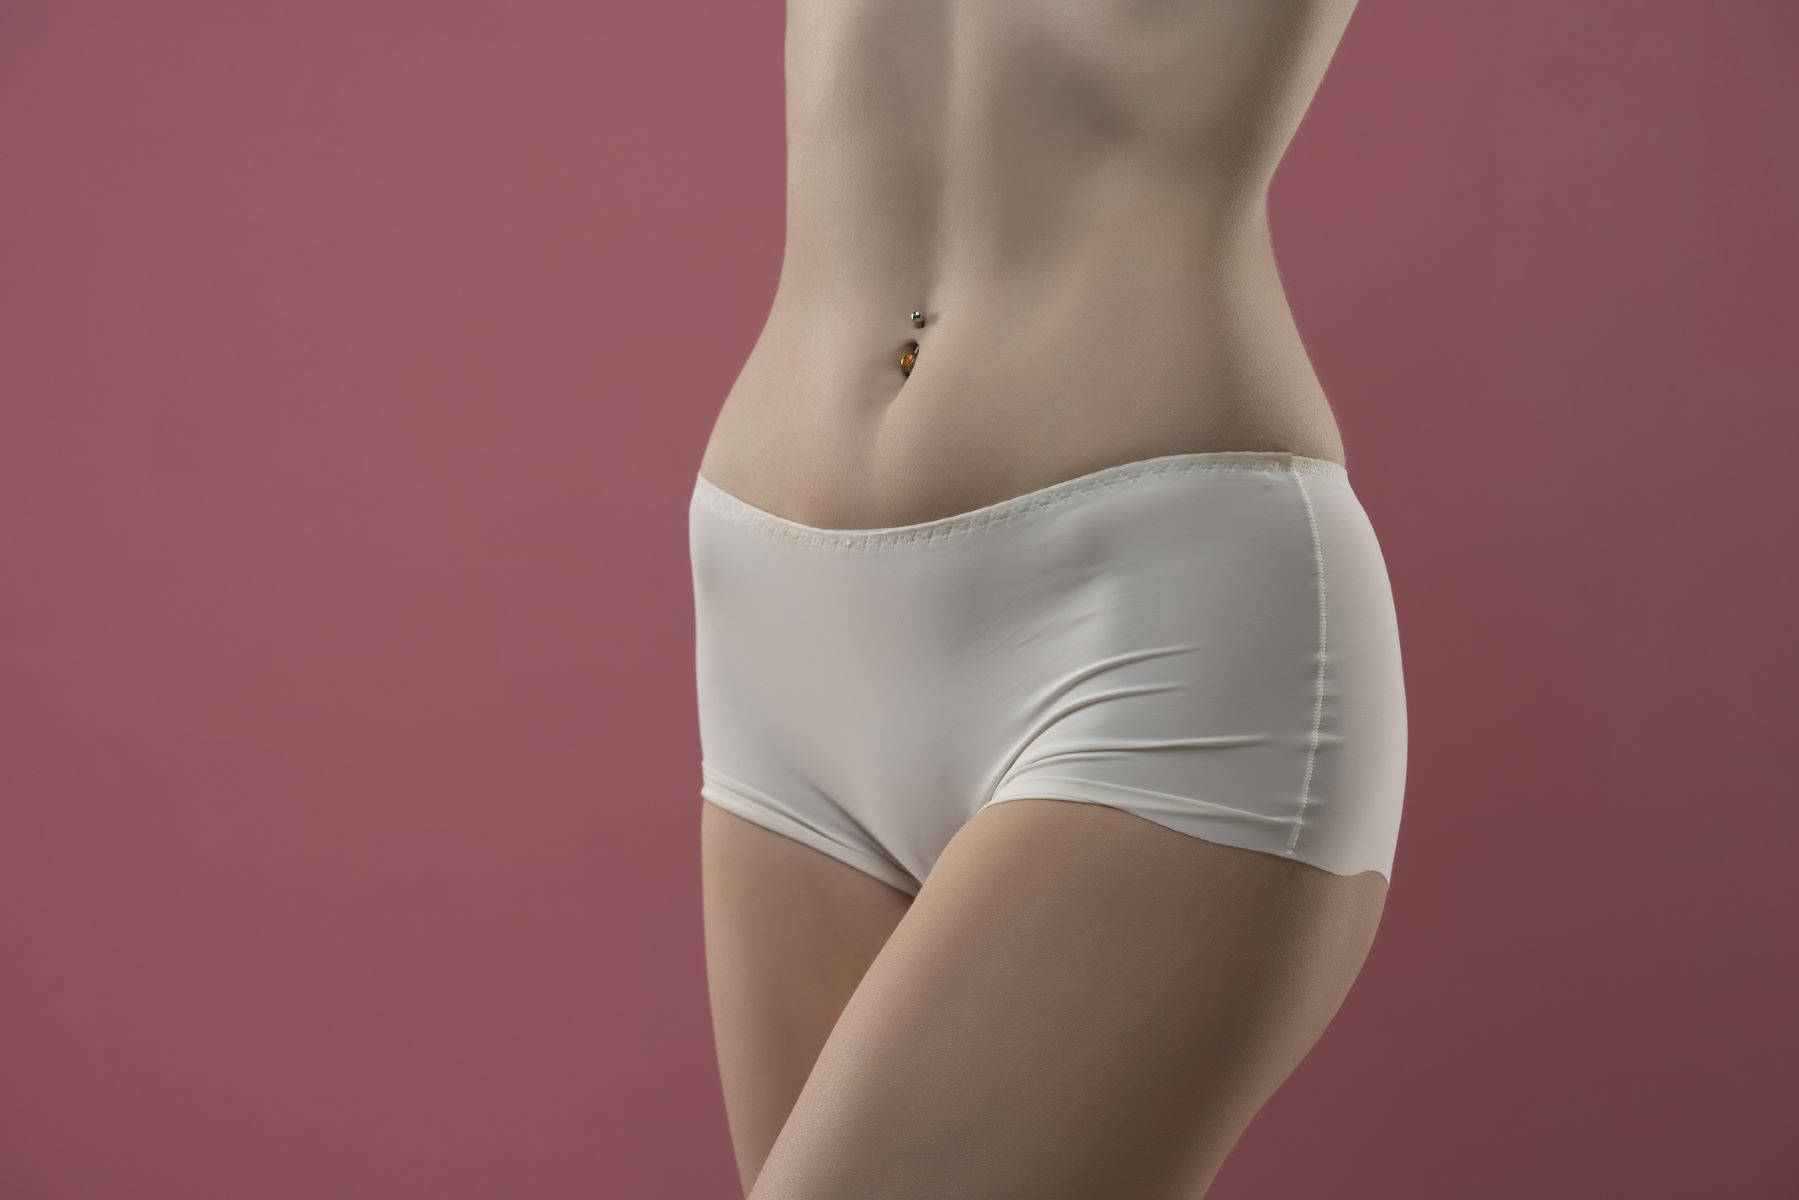 Pubic Hair Transplant: Procedure, Costs, Results, Side Effects